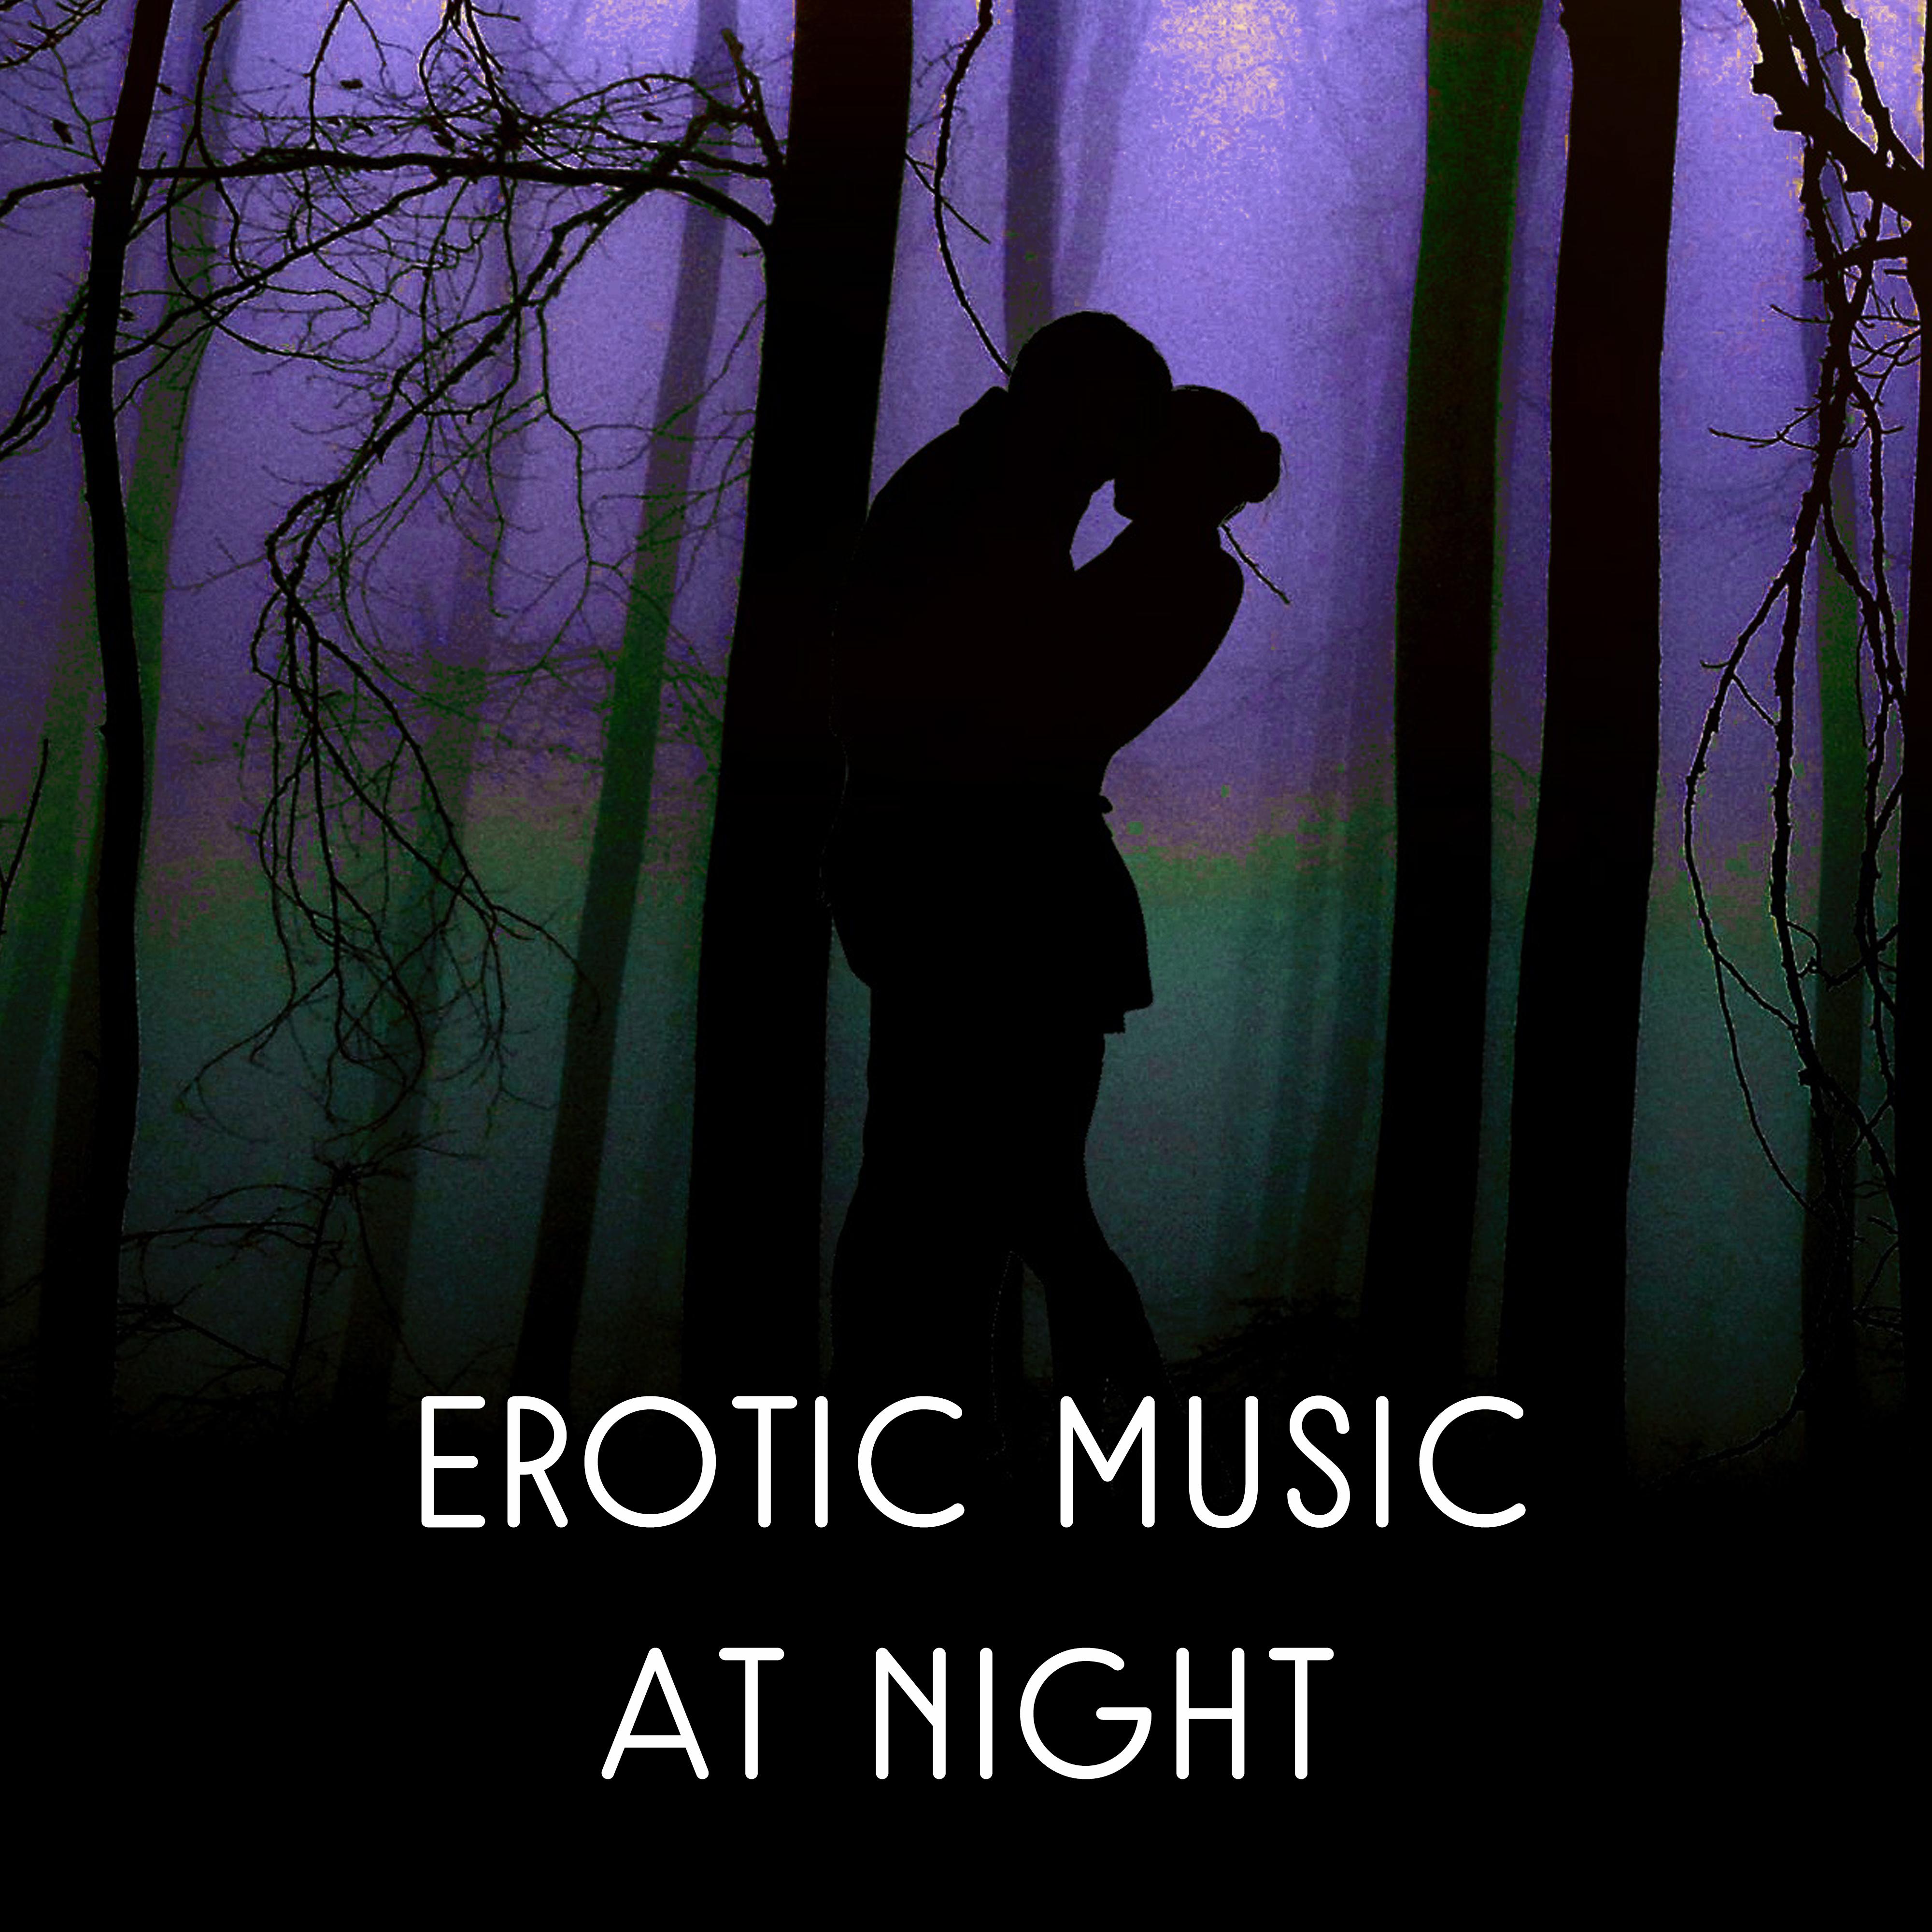 Erotic Music at Night  Sensual Jazz Music, Romantic Evening, Sexy Jazz, Relaxation Sounds for Rest, Soothing Piano, Deep Massage